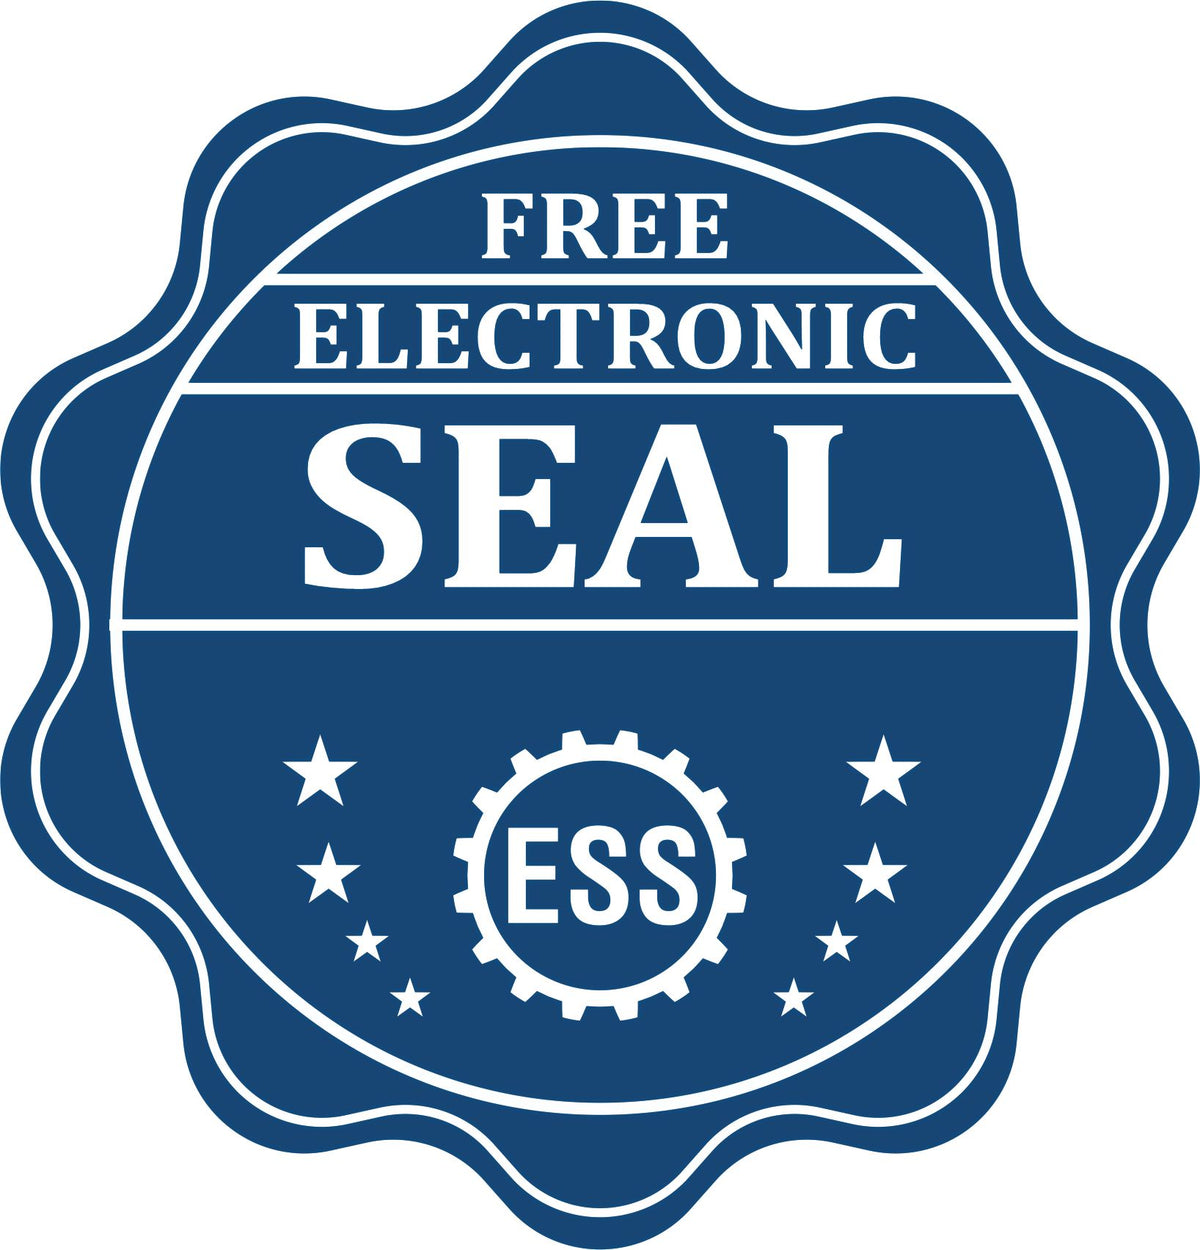 A badge showing a free electronic seal for the State of Vermont Extended Long Reach Geologist Seal with stars and the ESS gear on the emblem.